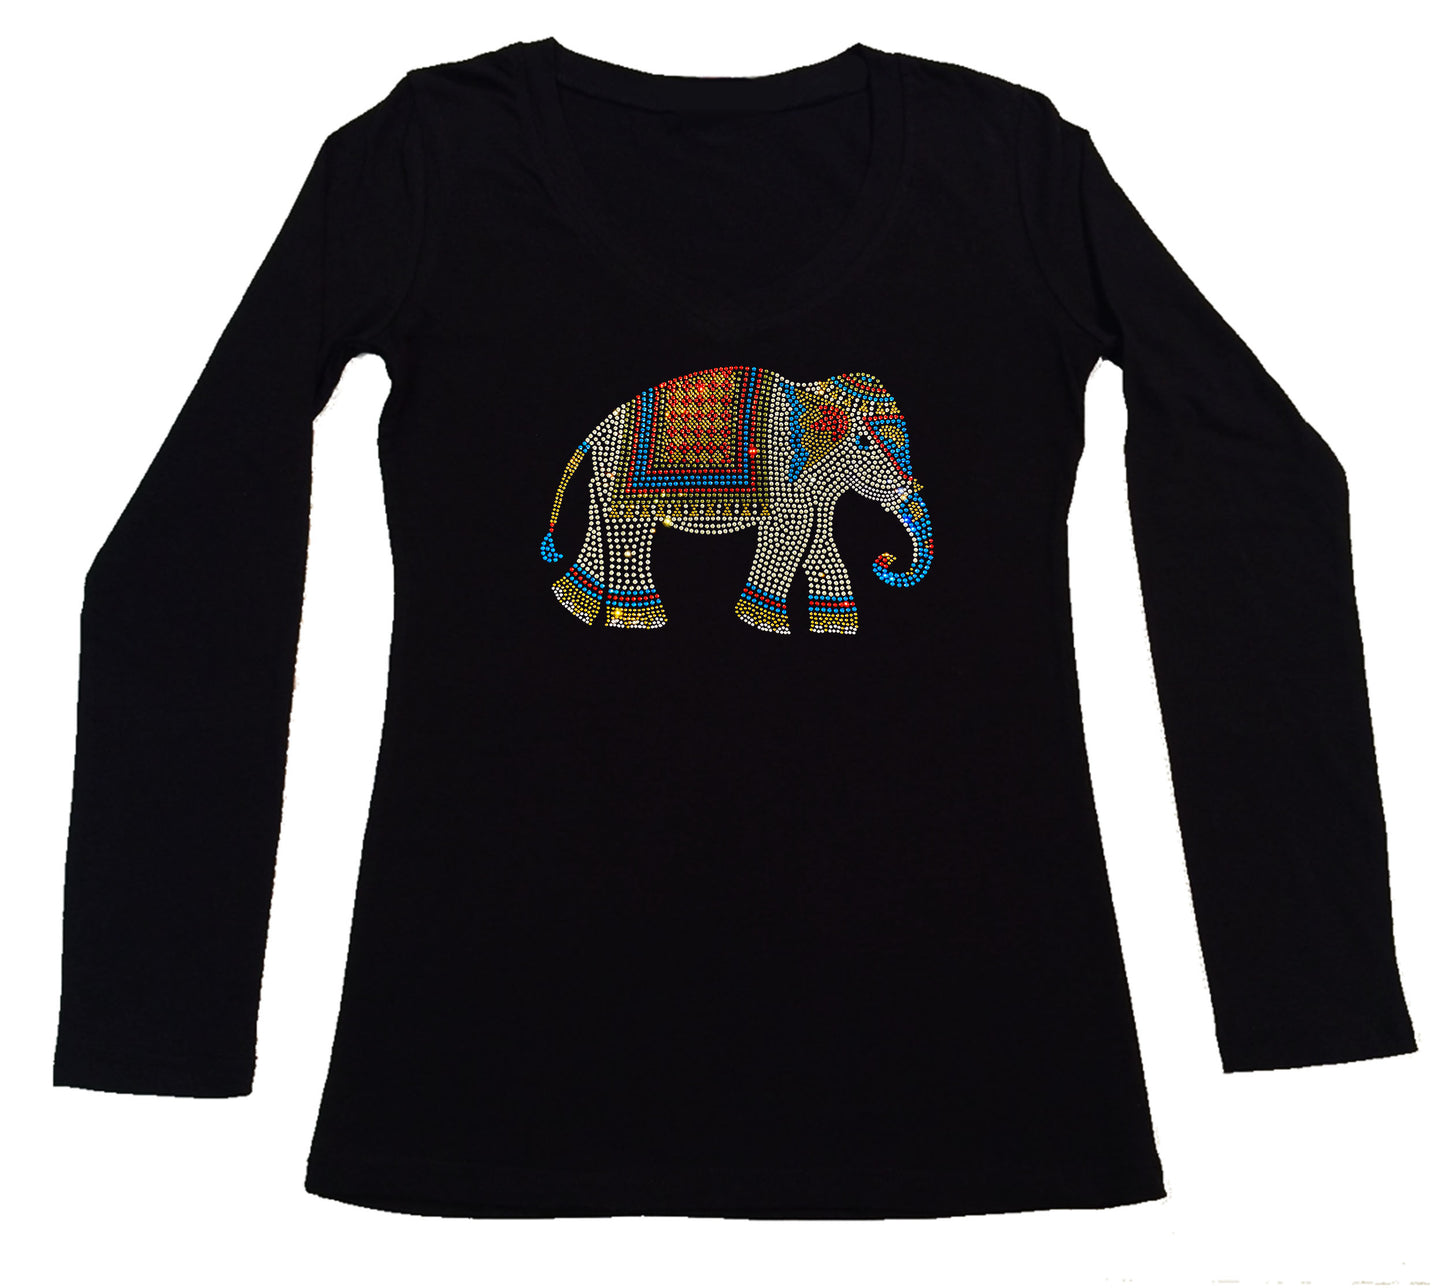 Women's Rhinestone Fitted Tight Snug Shirt Colorful Indian Elephant